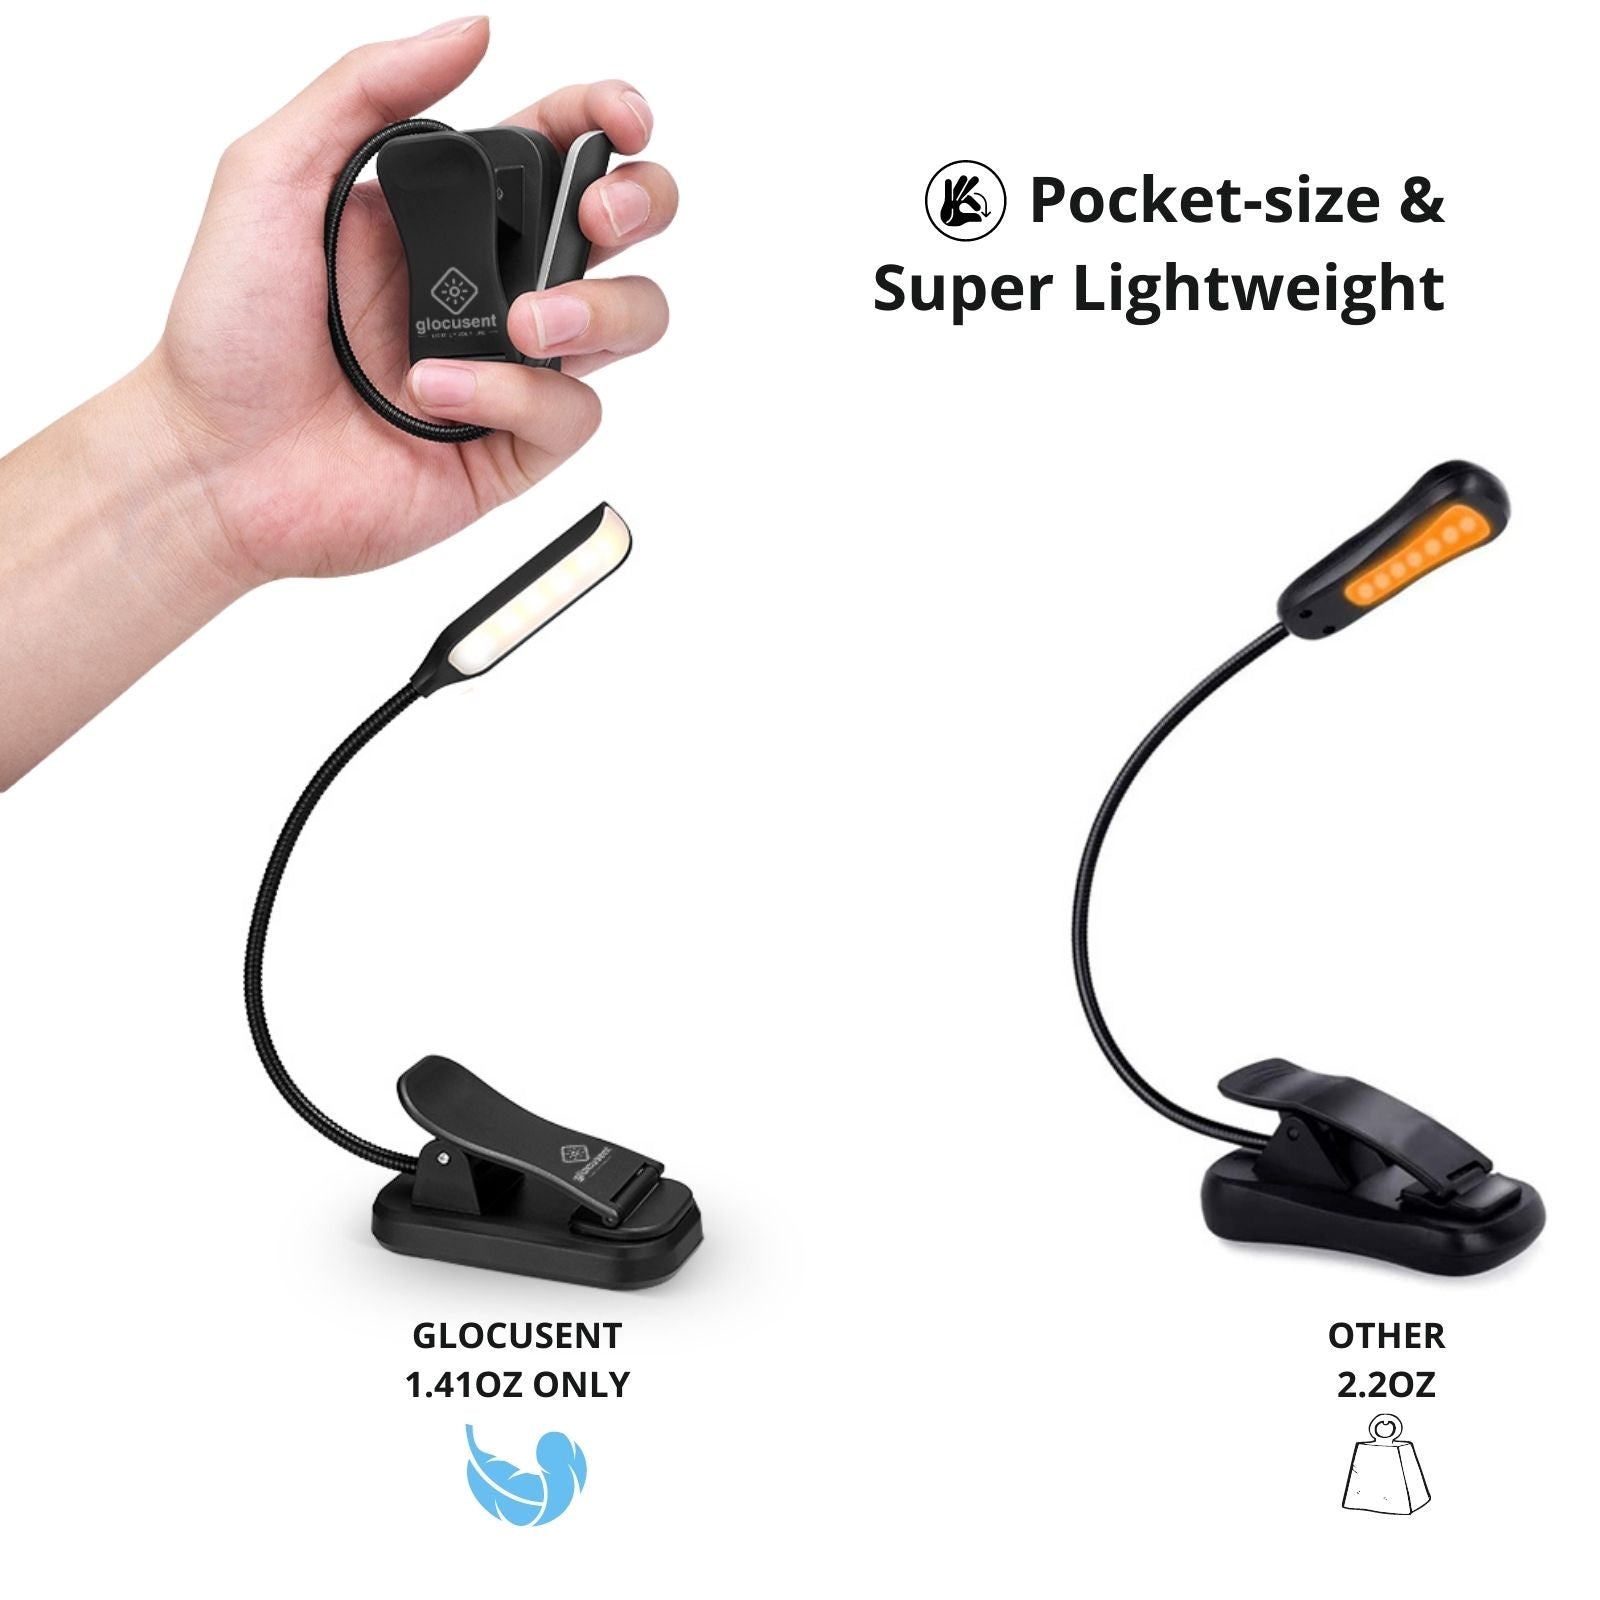 the best pocket-size light for reading in bed